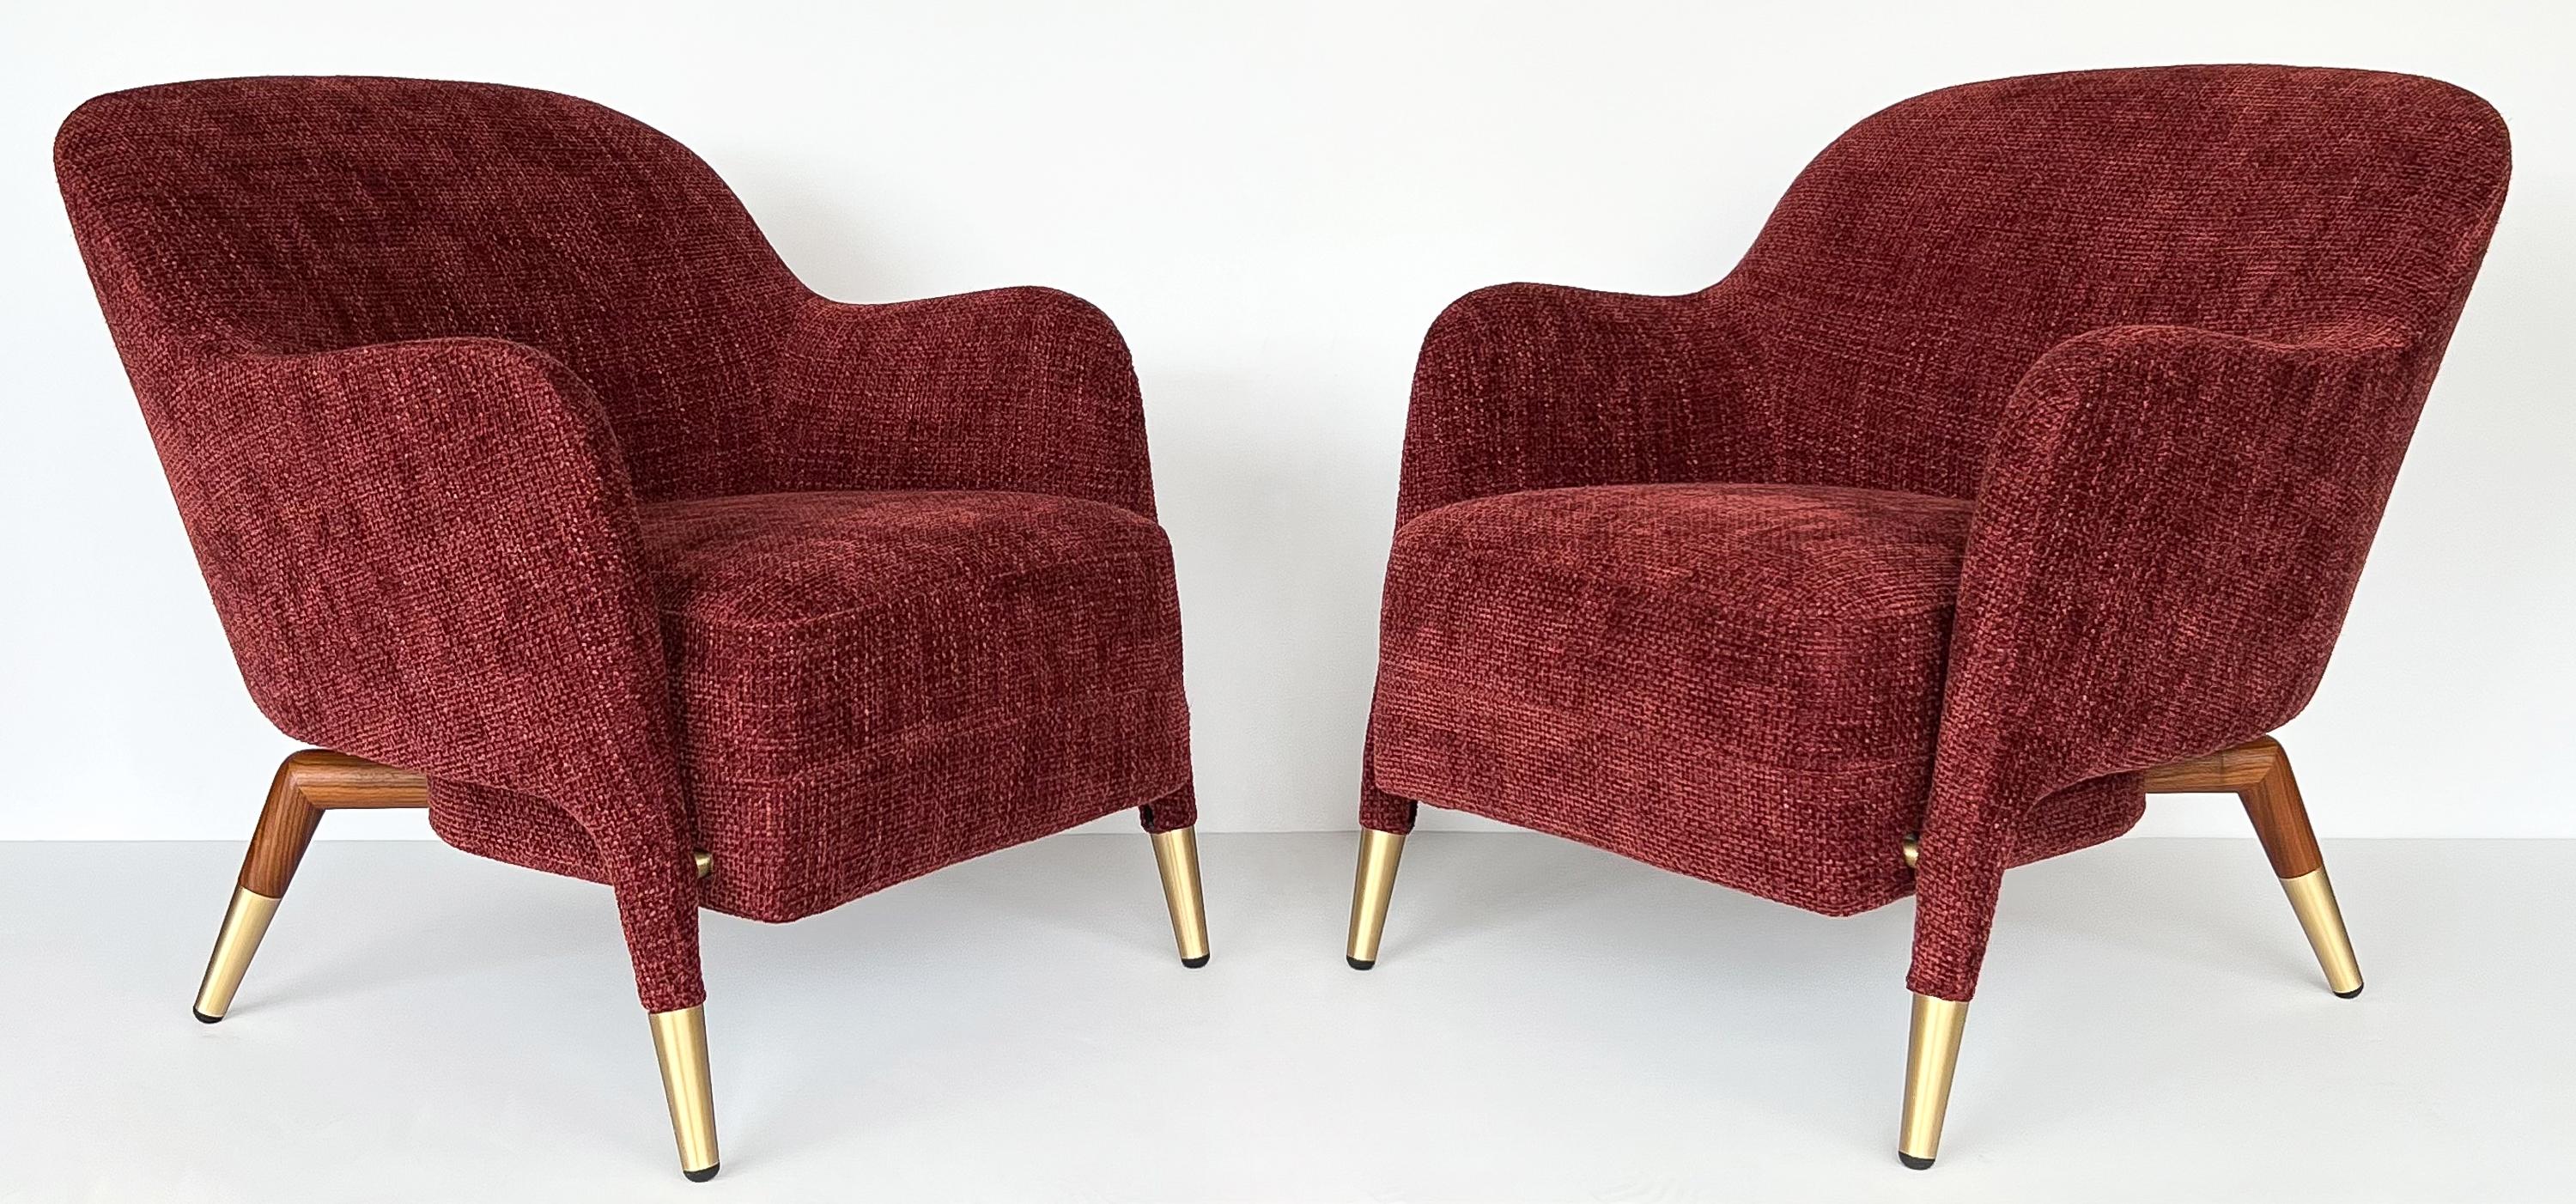 Pair of Gio Ponti model D.151.4 armchairs by Molteni &C, Italy circa 2020s. These sculptural lounge chairs are a new production and part of the Molteni & C Heritage Collection. Newly upholstered in a sophisticated maroon / merlot colored chenille